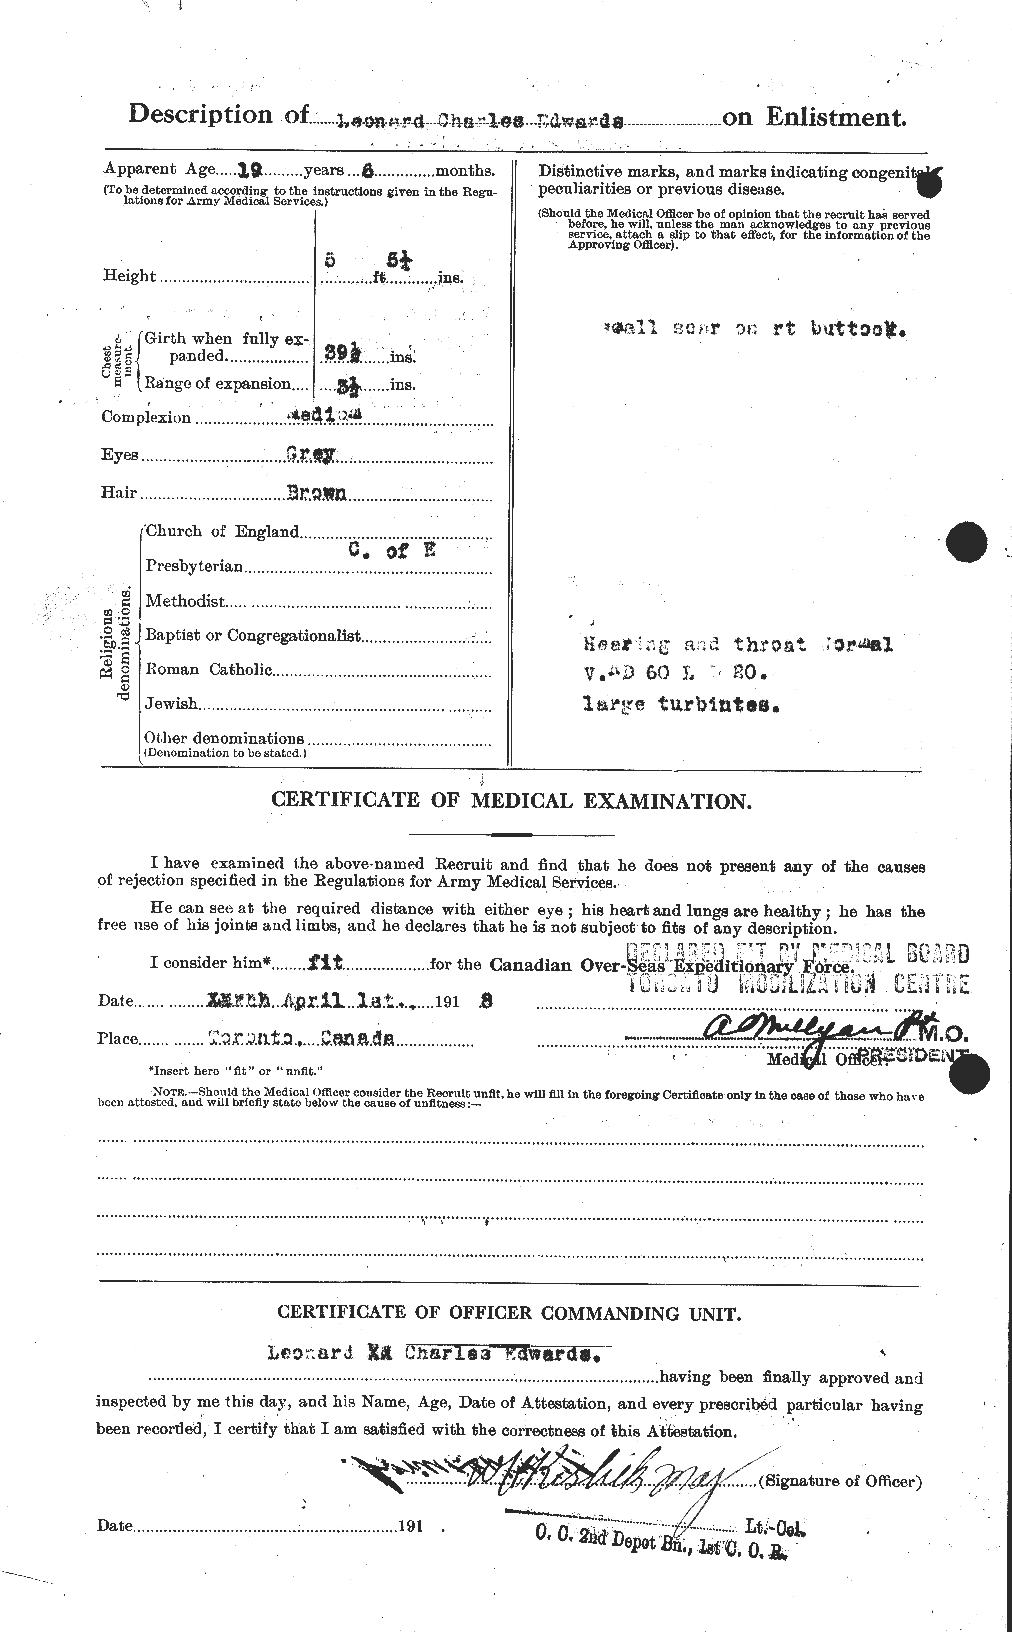 Personnel Records of the First World War - CEF 310196b